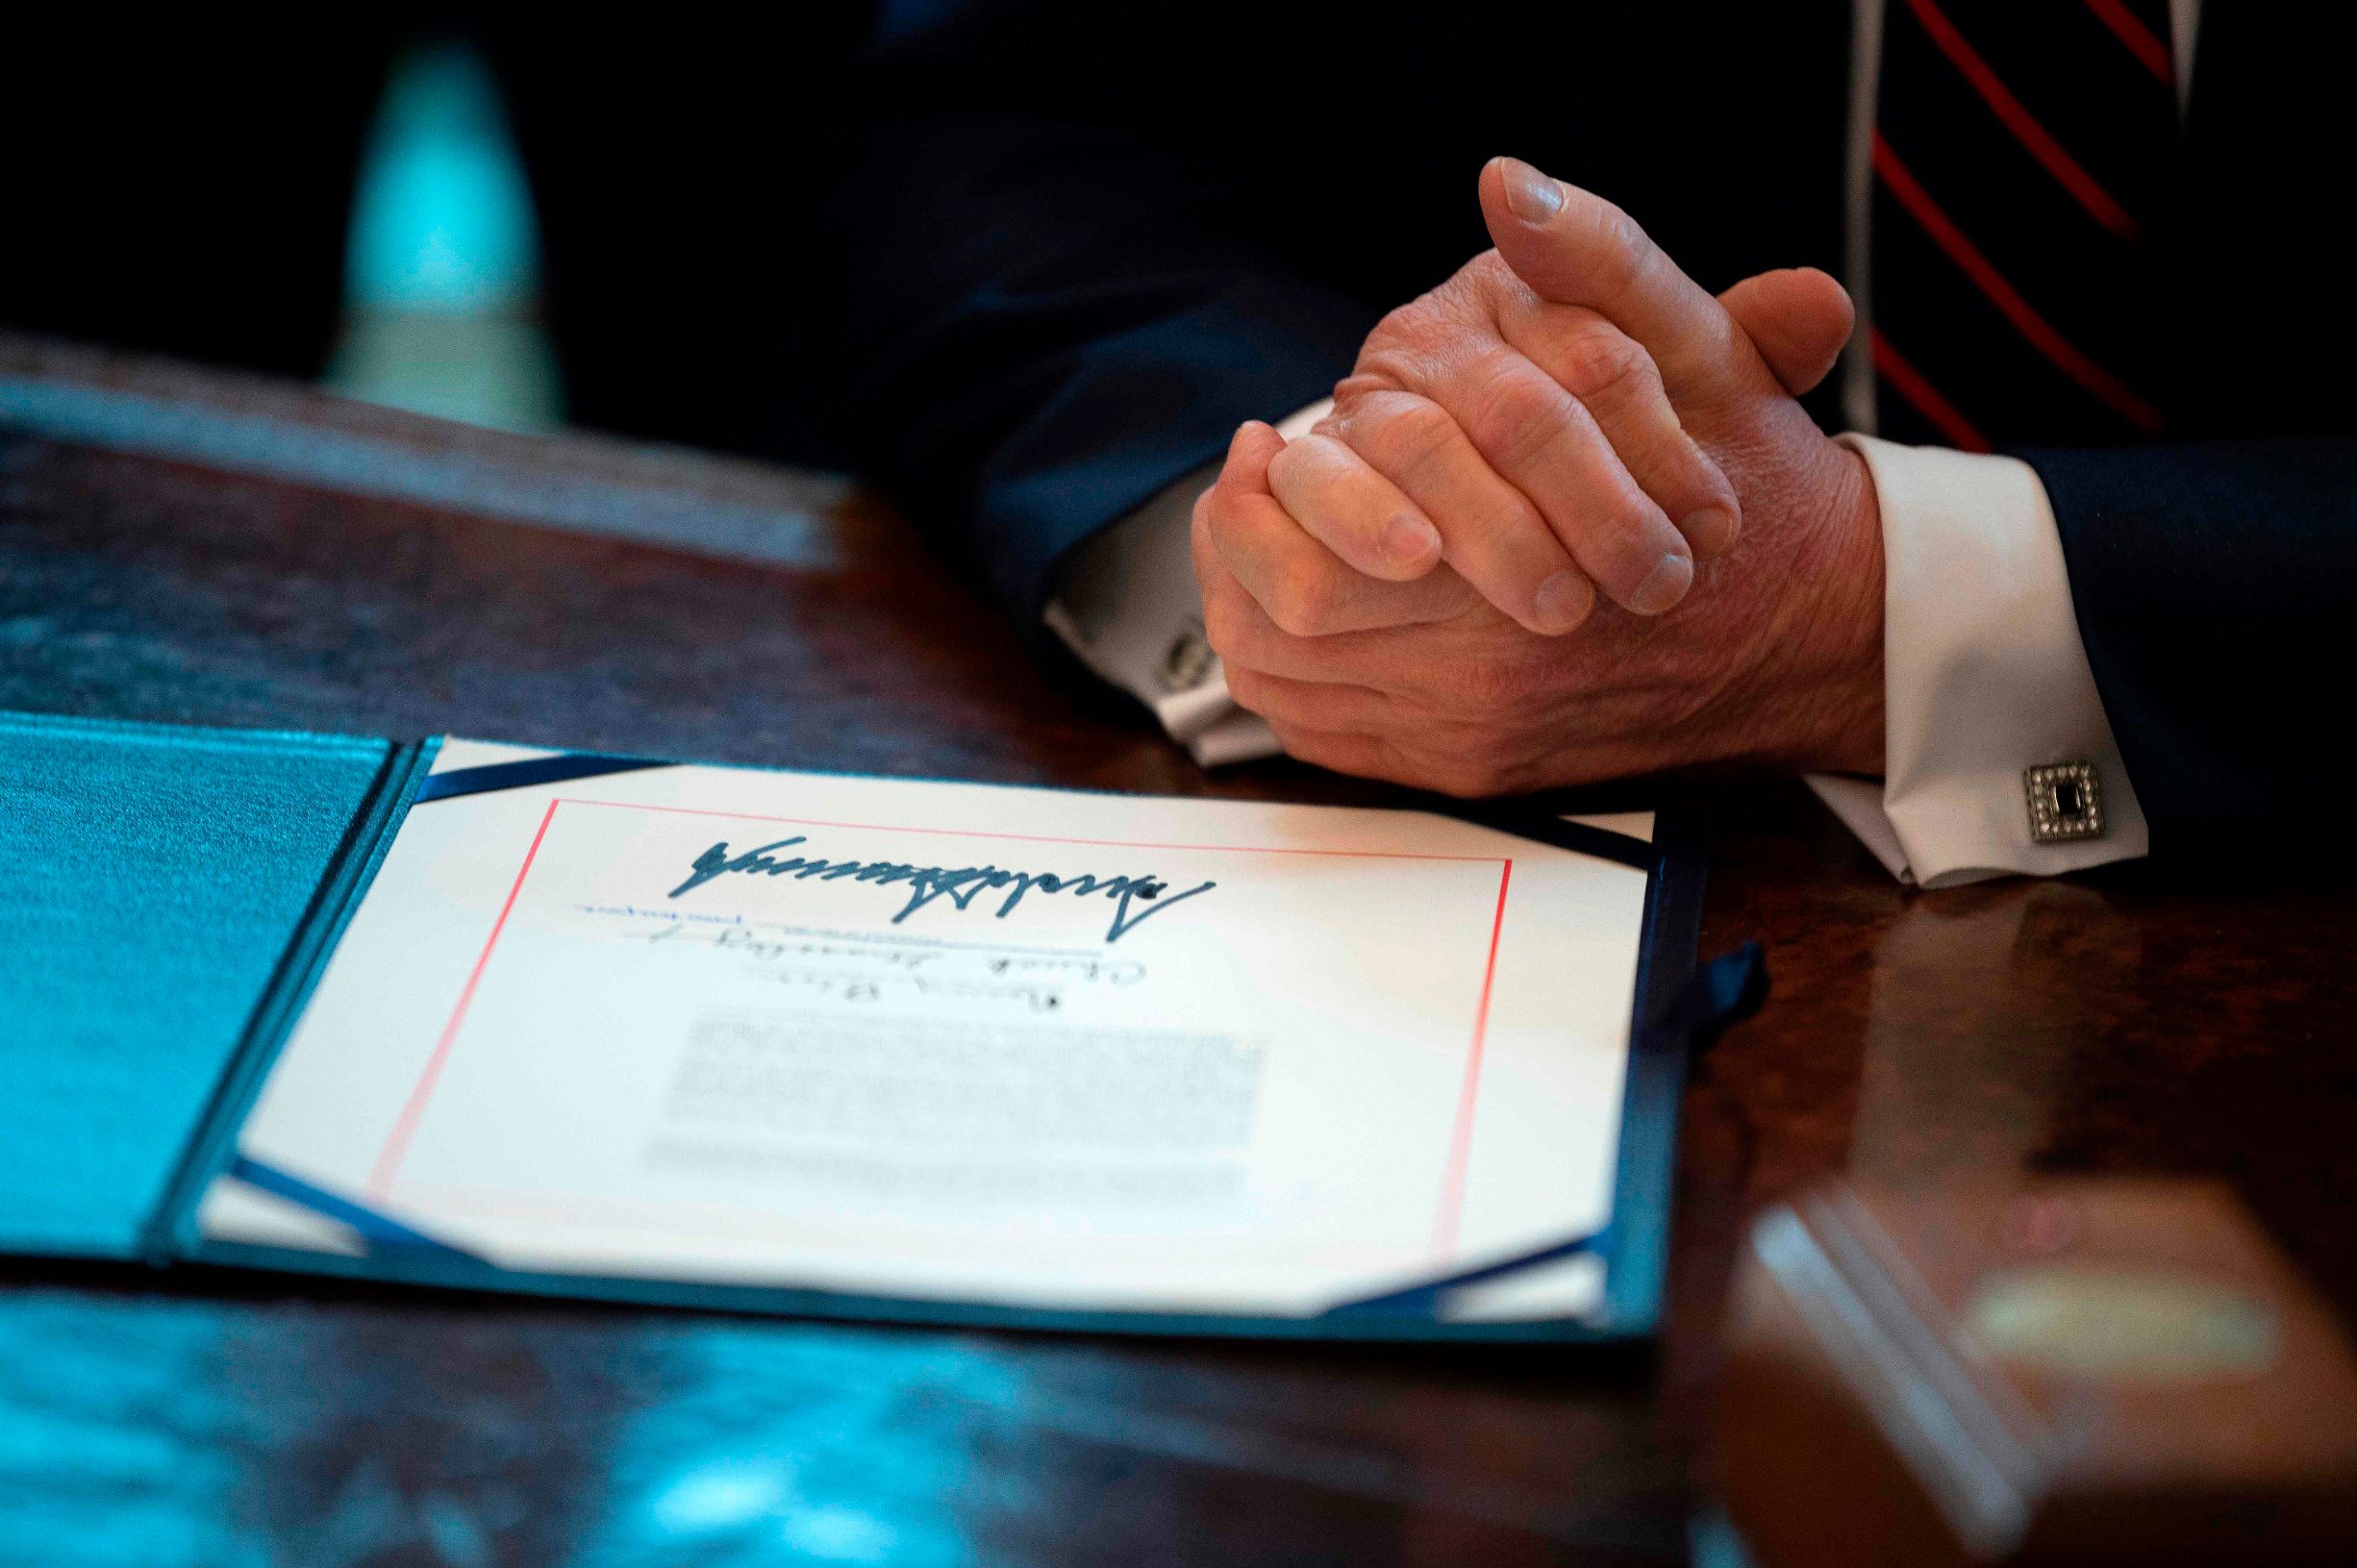 US President Donald Trump signs the CARES act, a  trillion rescue package to provide economic relief amid the coronavirus outbreak, at the Oval Office of the White House on March 27, 2020. - After clearing the Senate earlier this week, and as the United States became the new global epicenter of the pandemic with 92,000 confirmed cases of infection, Republicans and Democrats united to greenlight the nation's largest-ever economic relief plan. (Photo by JIM WATSON / AFP)